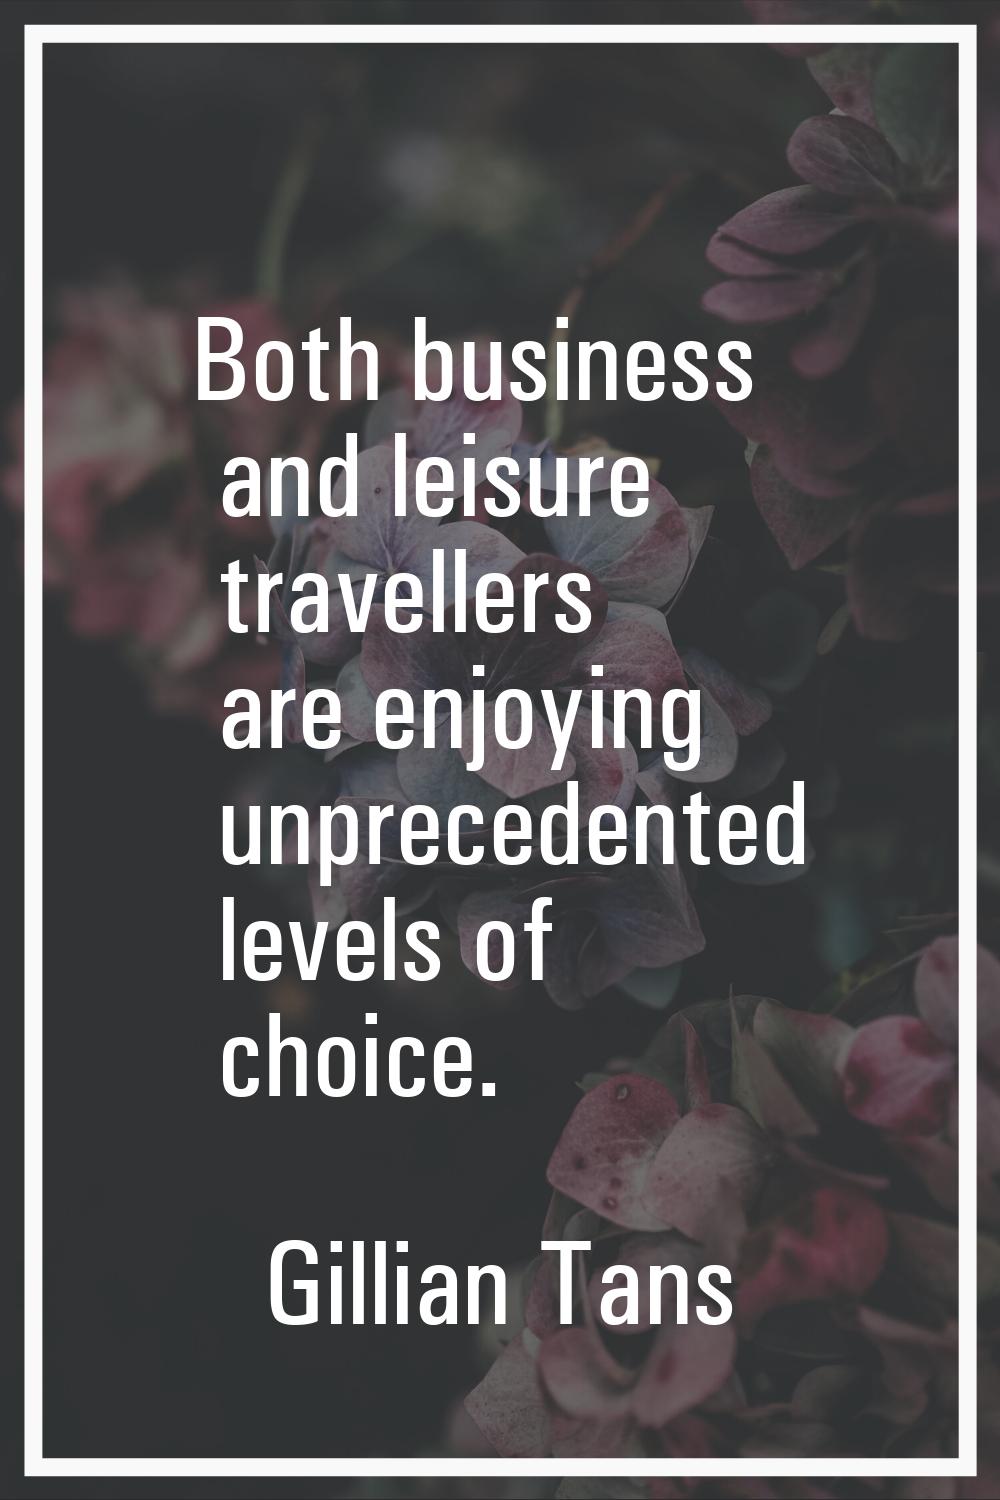 Both business and leisure travellers are enjoying unprecedented levels of choice.